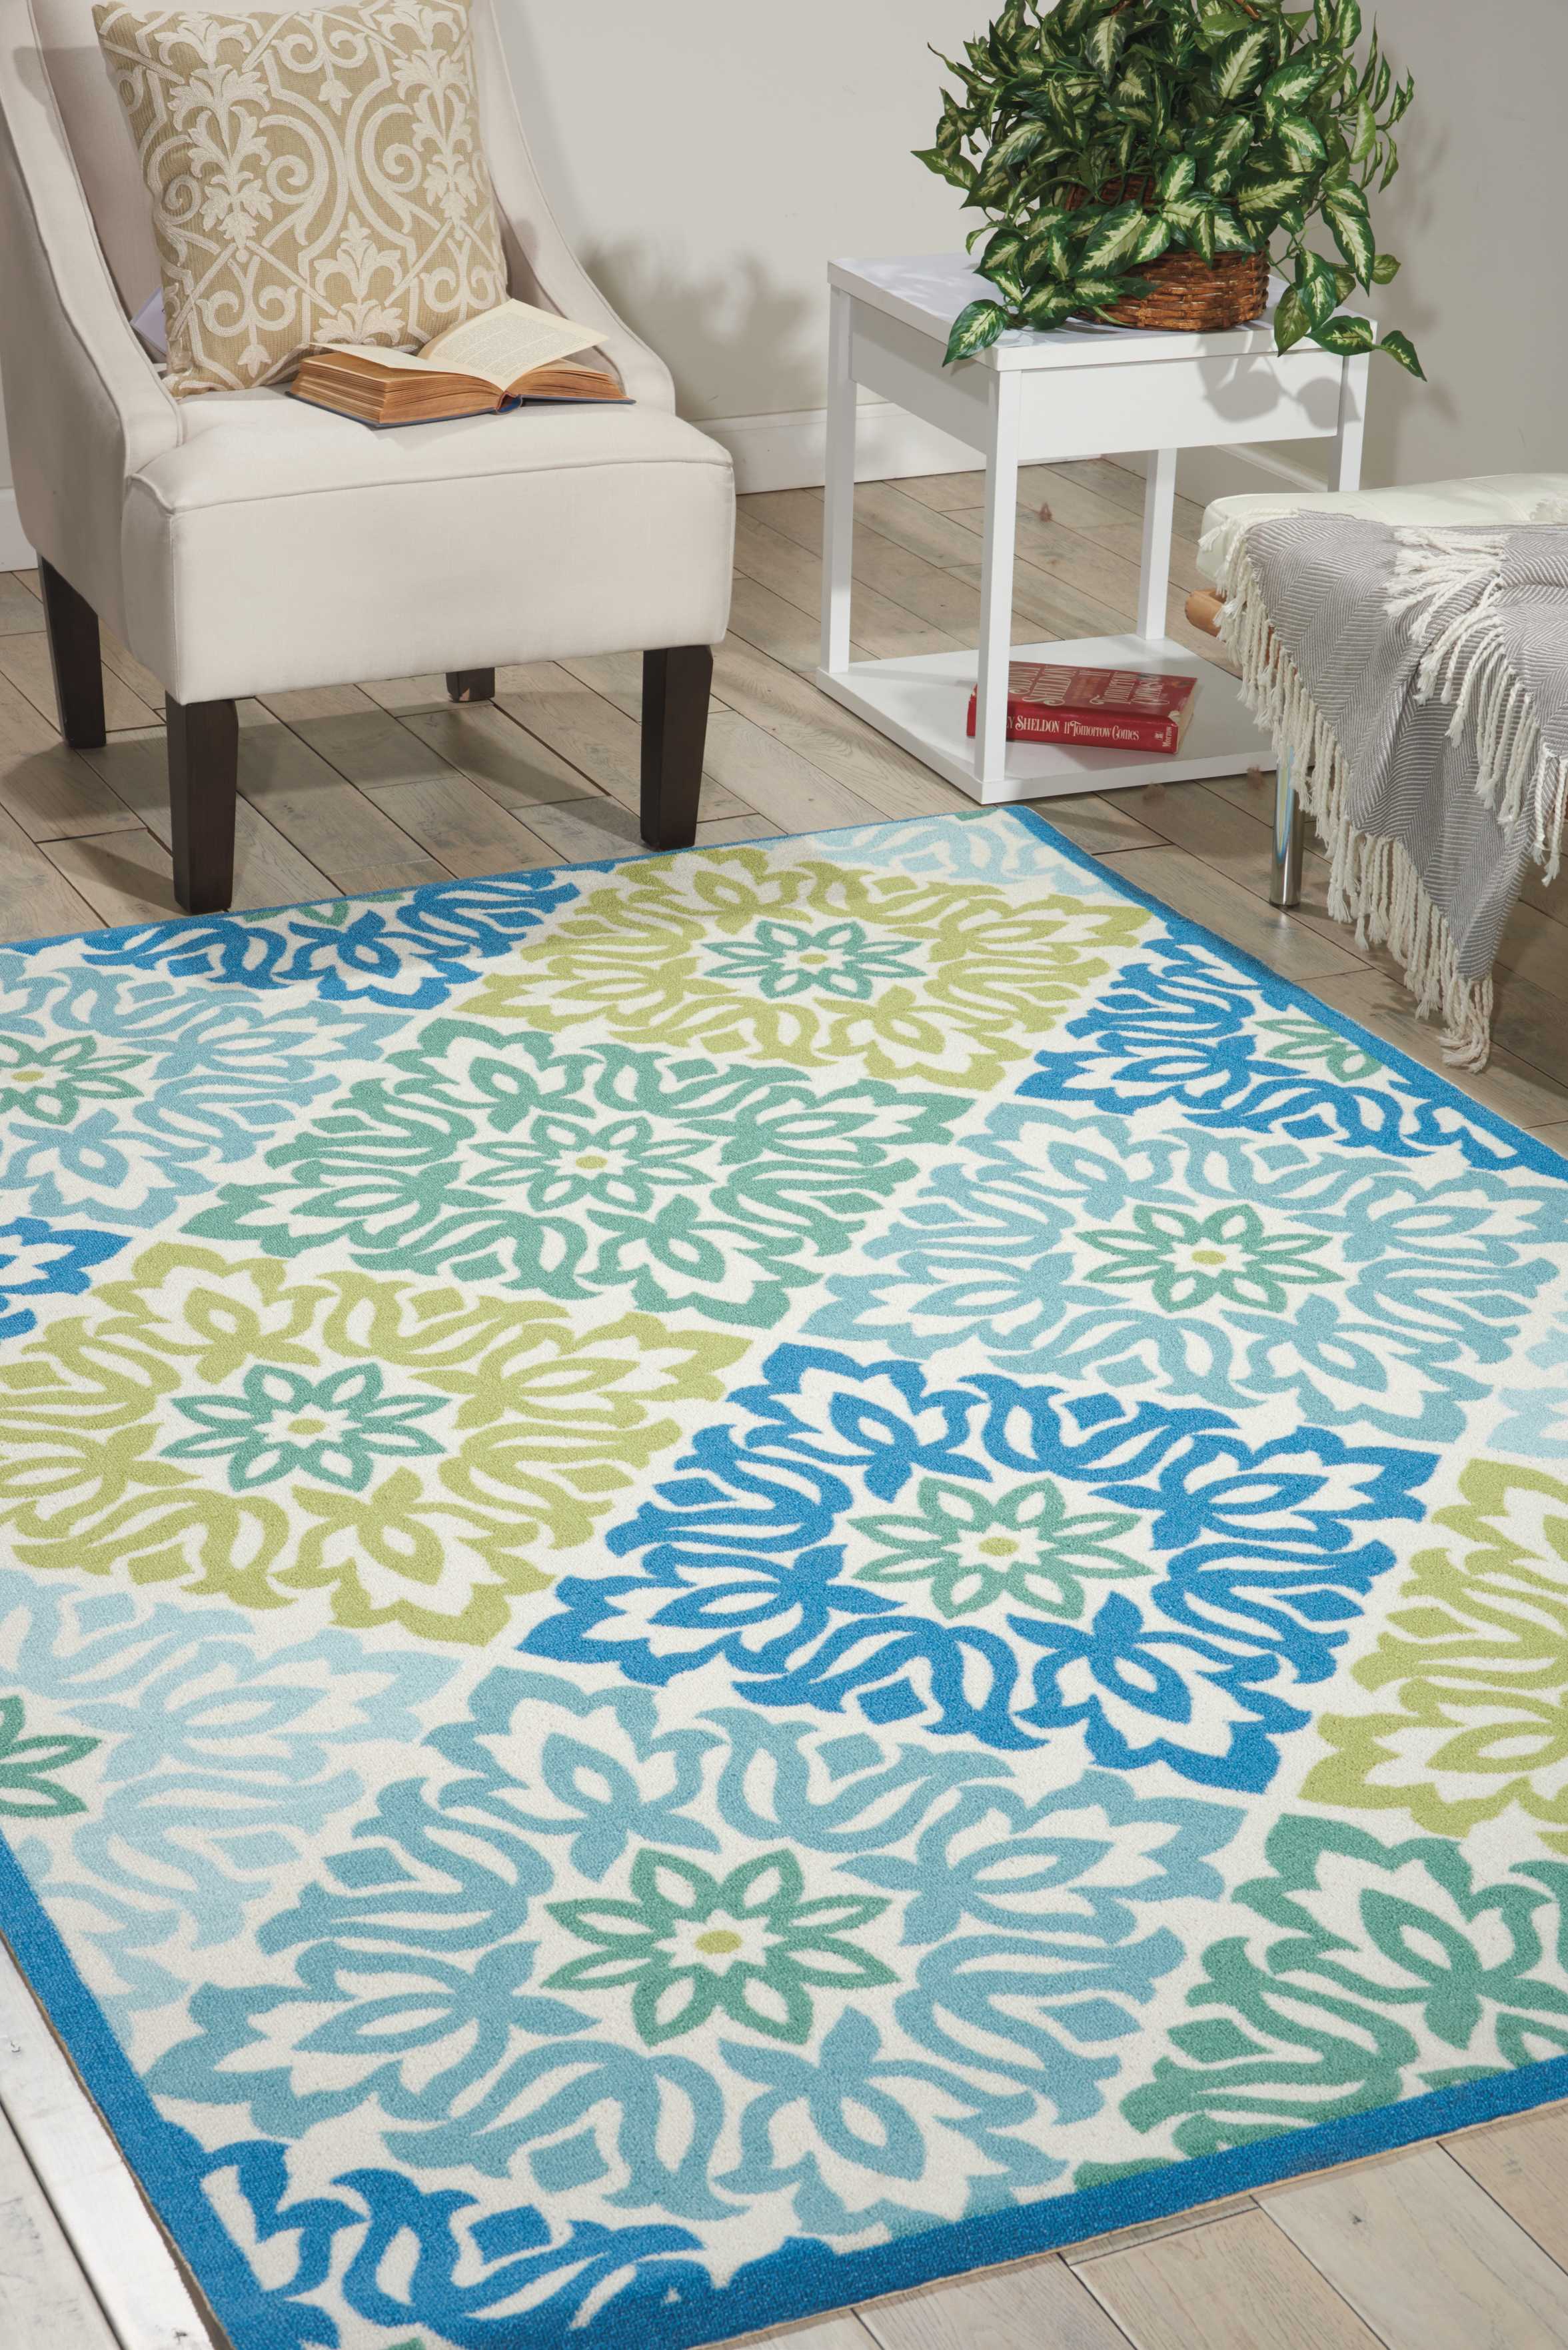 Waverly Sun & Shade Sweet Things Marine Indoor/Outdoor Area Rug by Nourison